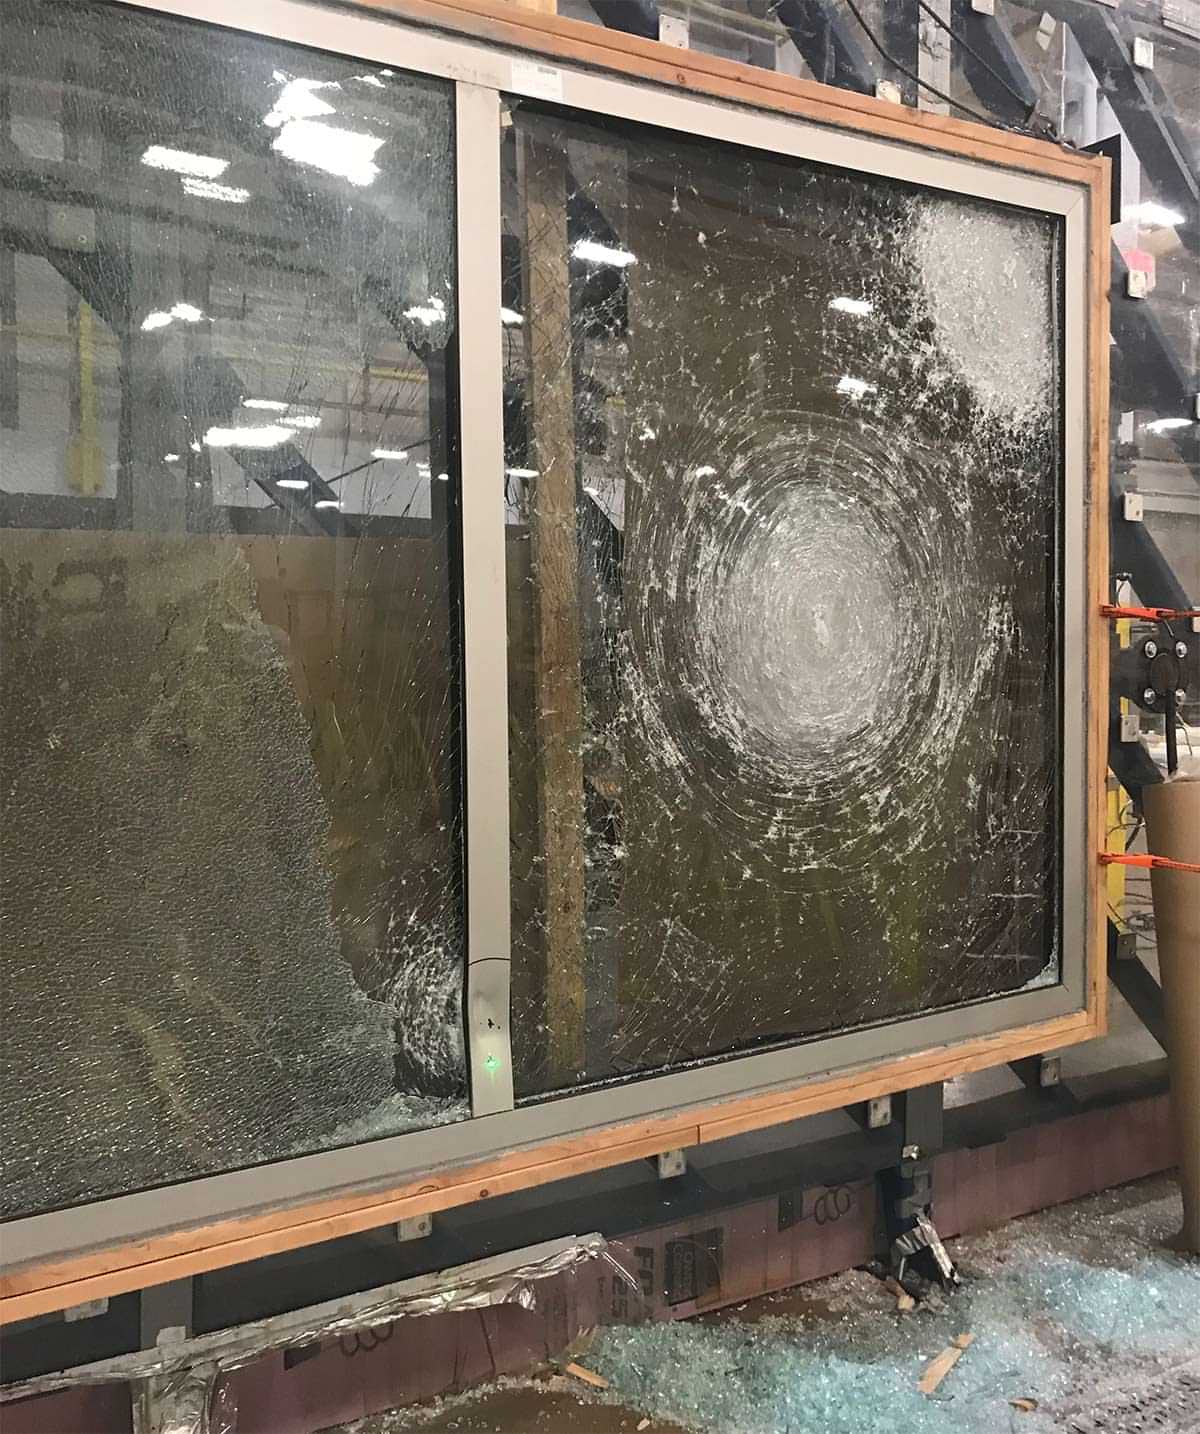 shattered window in a lab warehouse setting